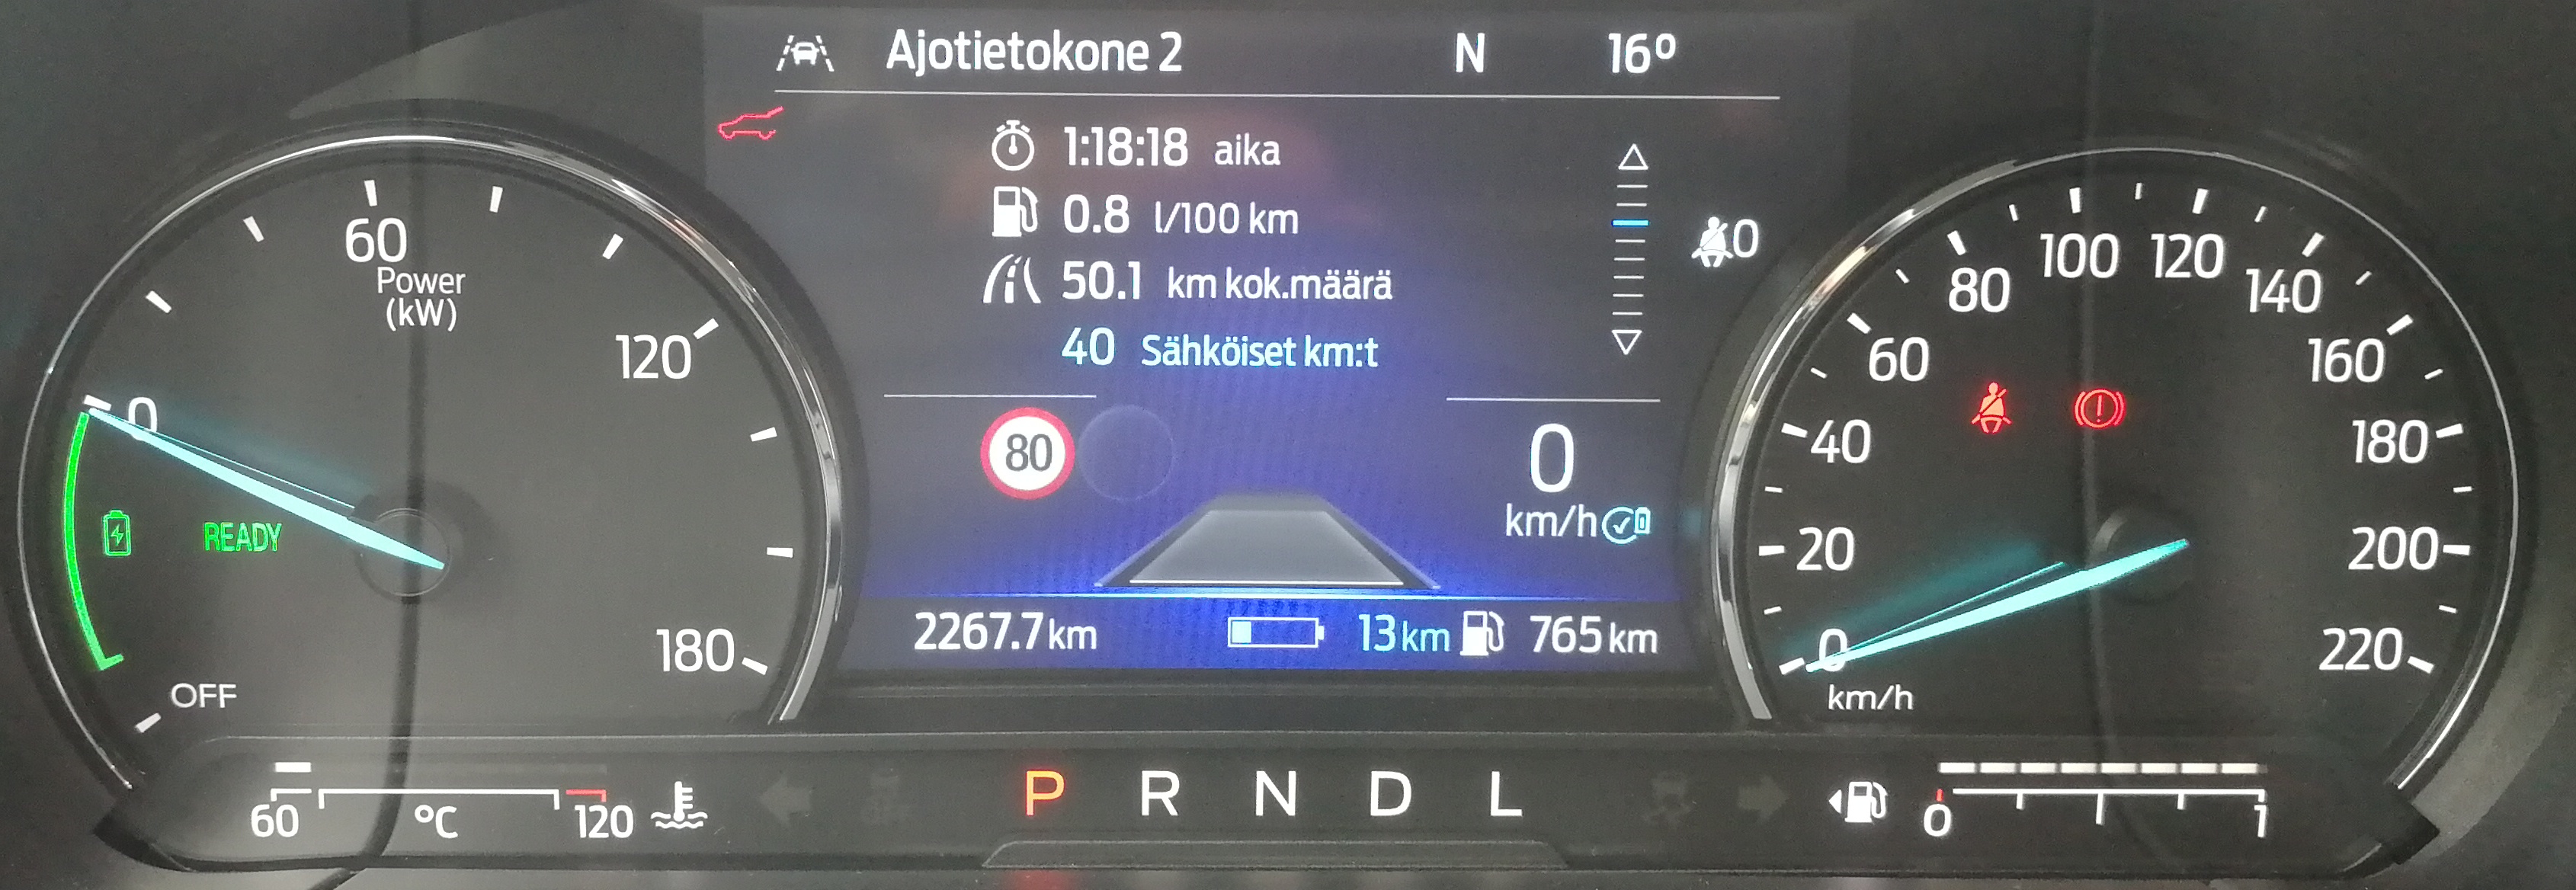 Ford Kuga PHEV consumpiton 0.8 l / 100 km for 50 km trip with full battery